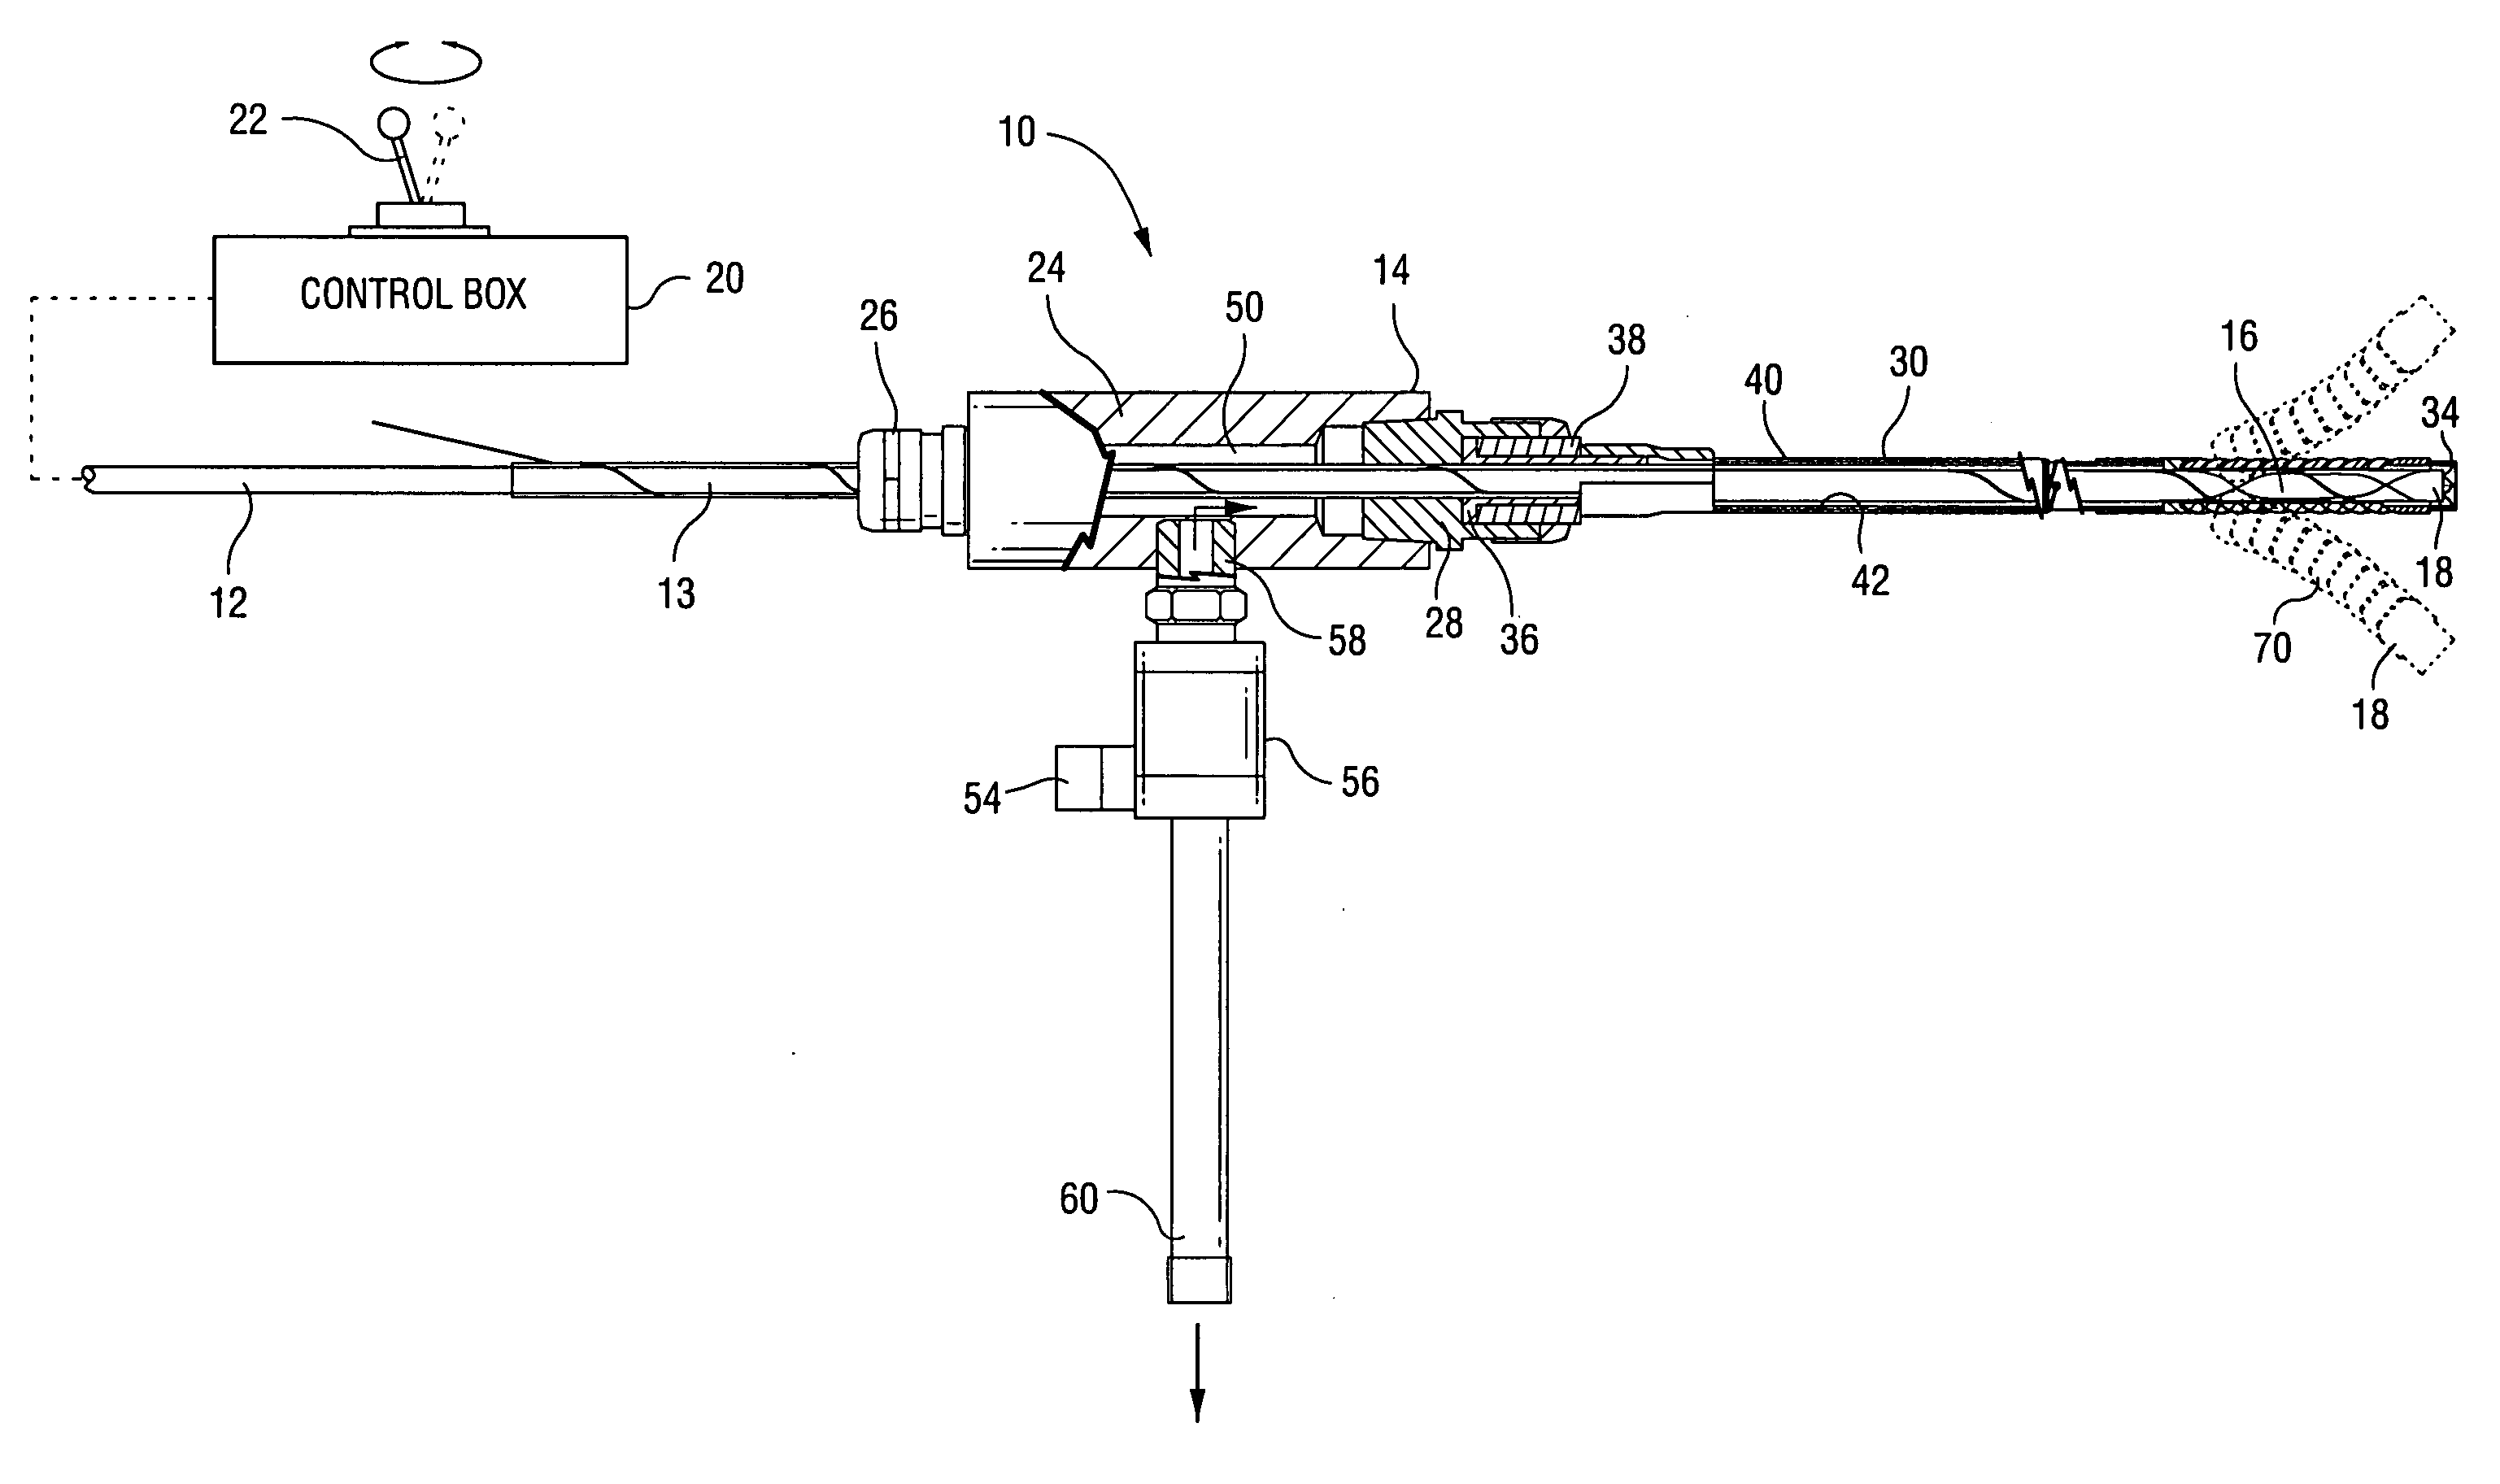 Flexible borescope assembly for inspecting internal turbine components at elevated temperatures